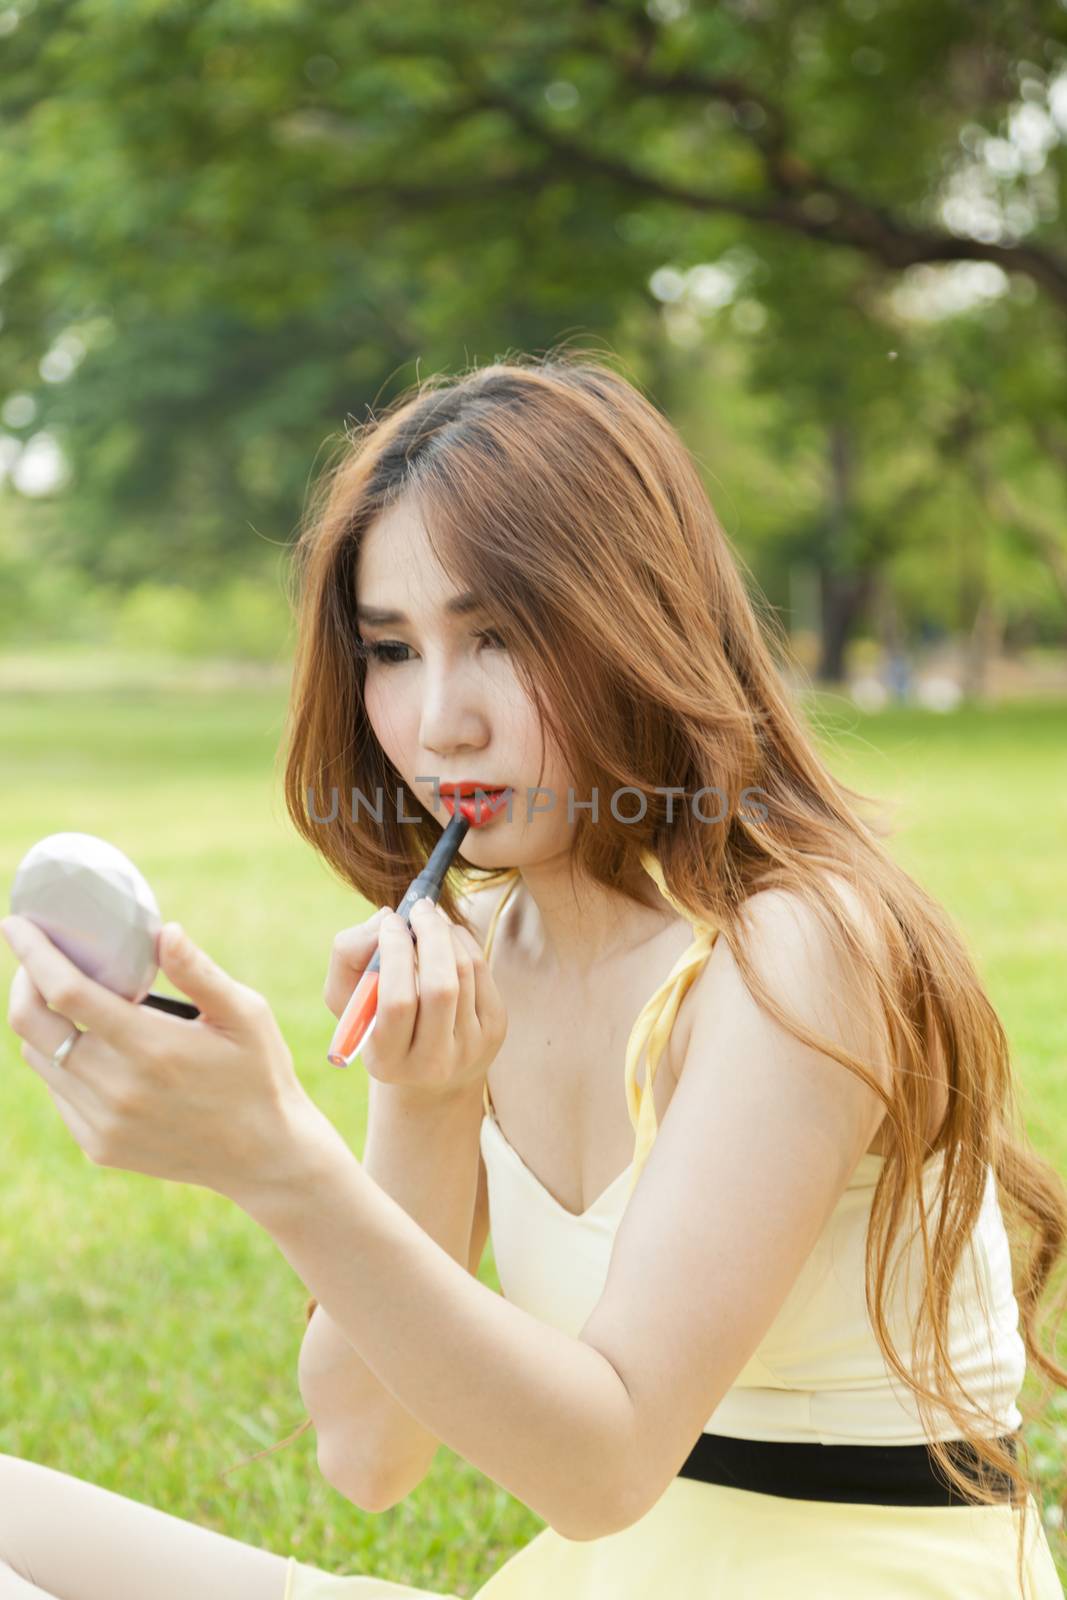 Woman in makeup Are lipstick and sitting on the lawn.